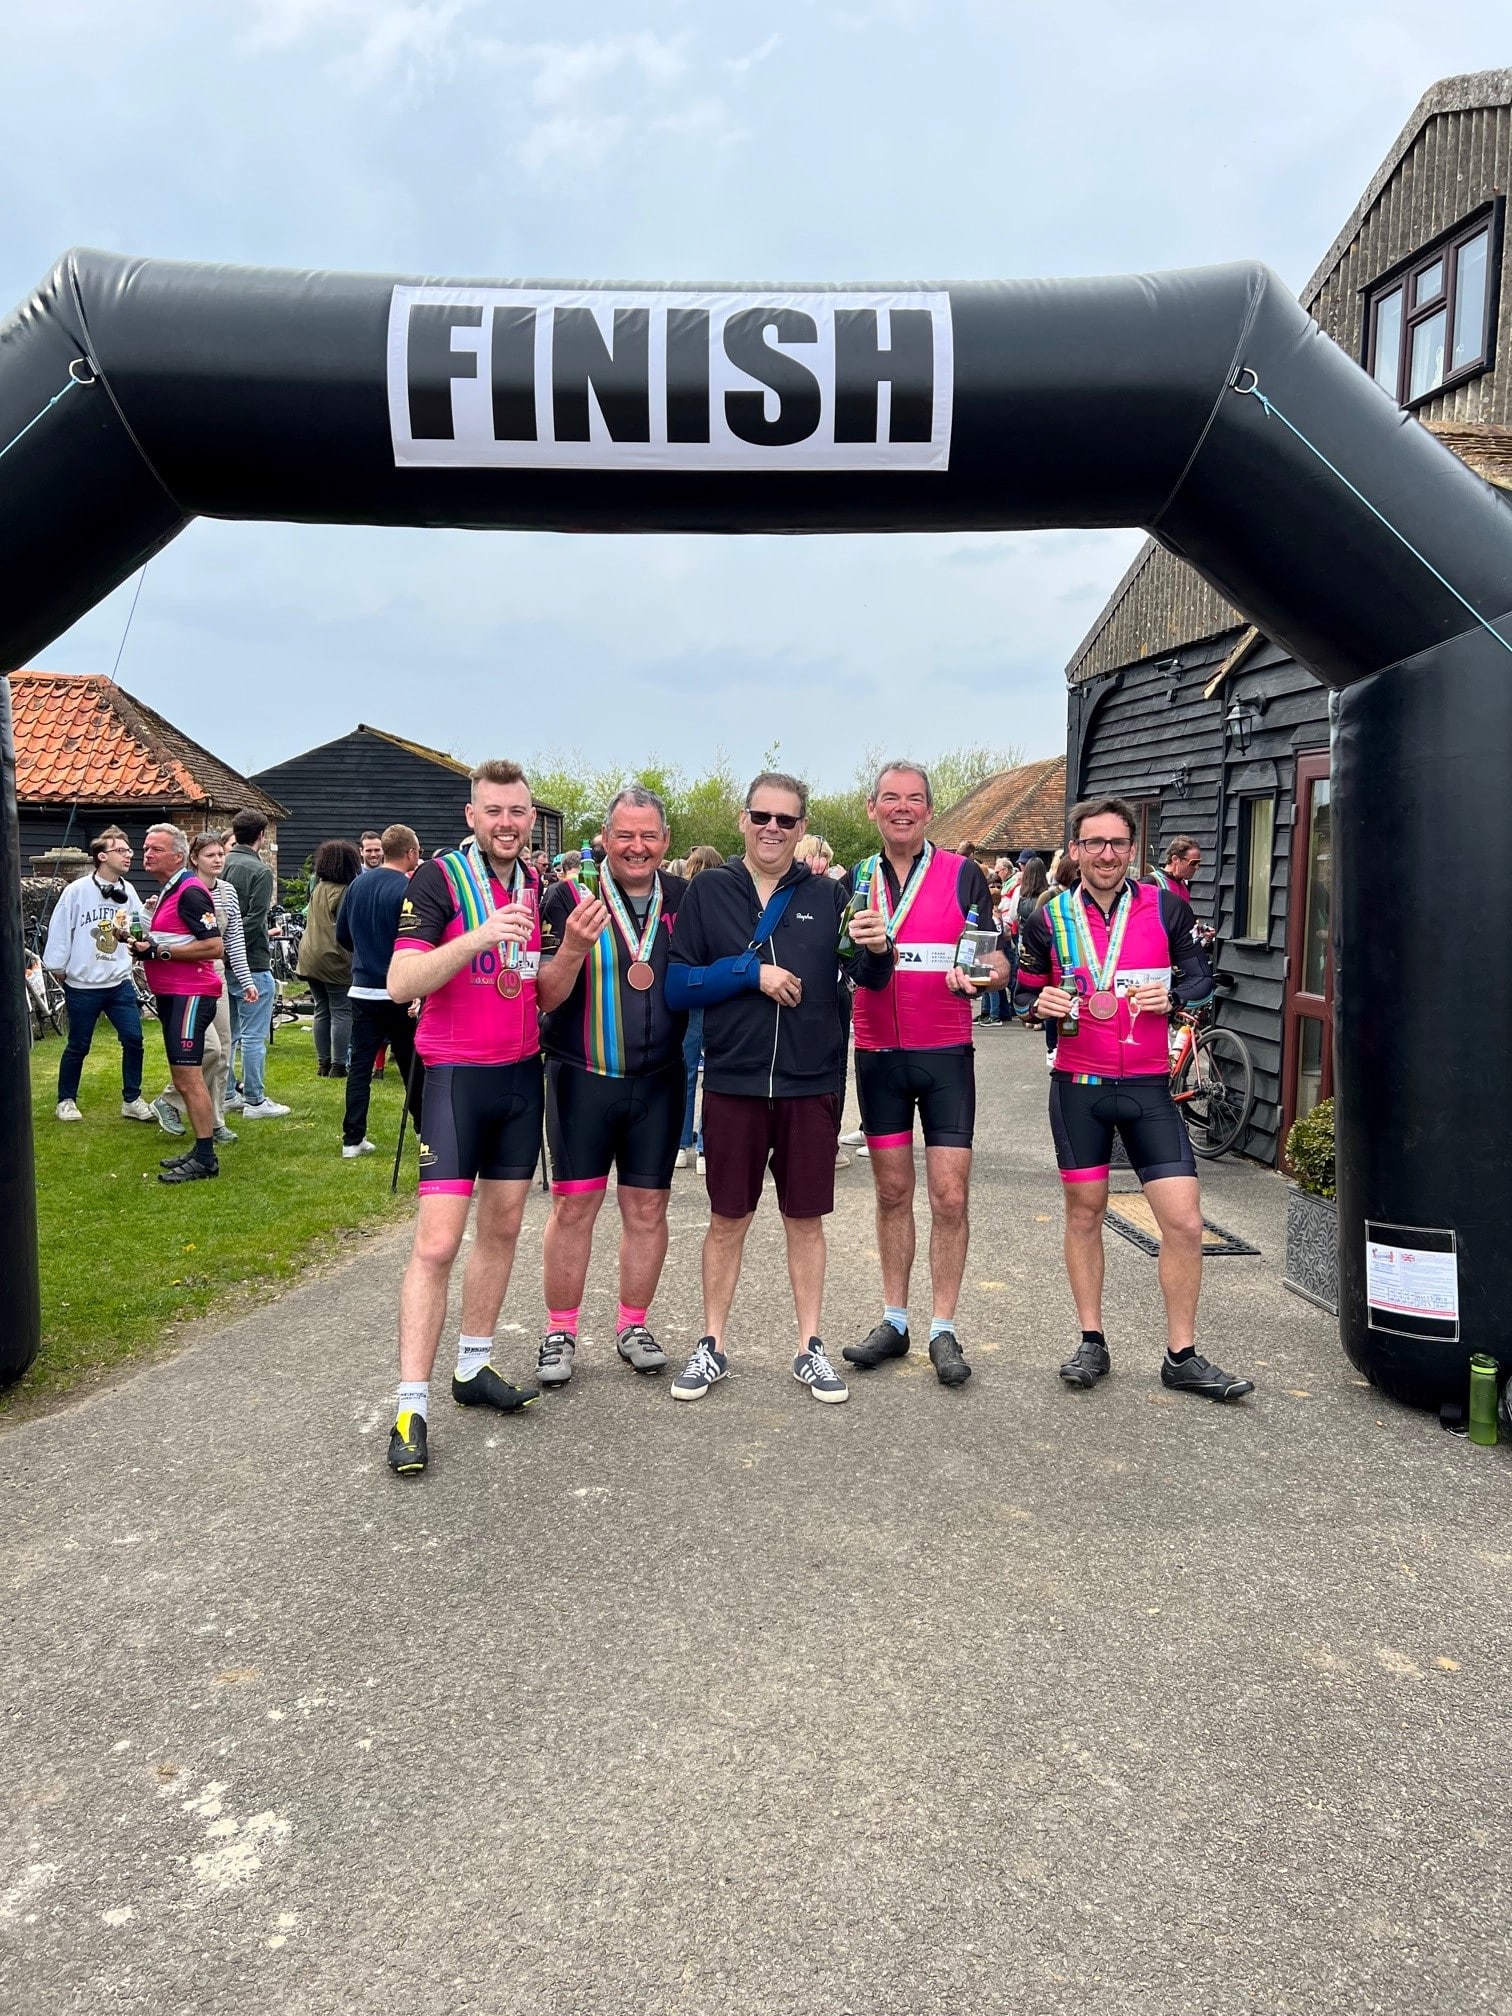 Halow 250 – Inoplas Team raises over £10,000 for charity